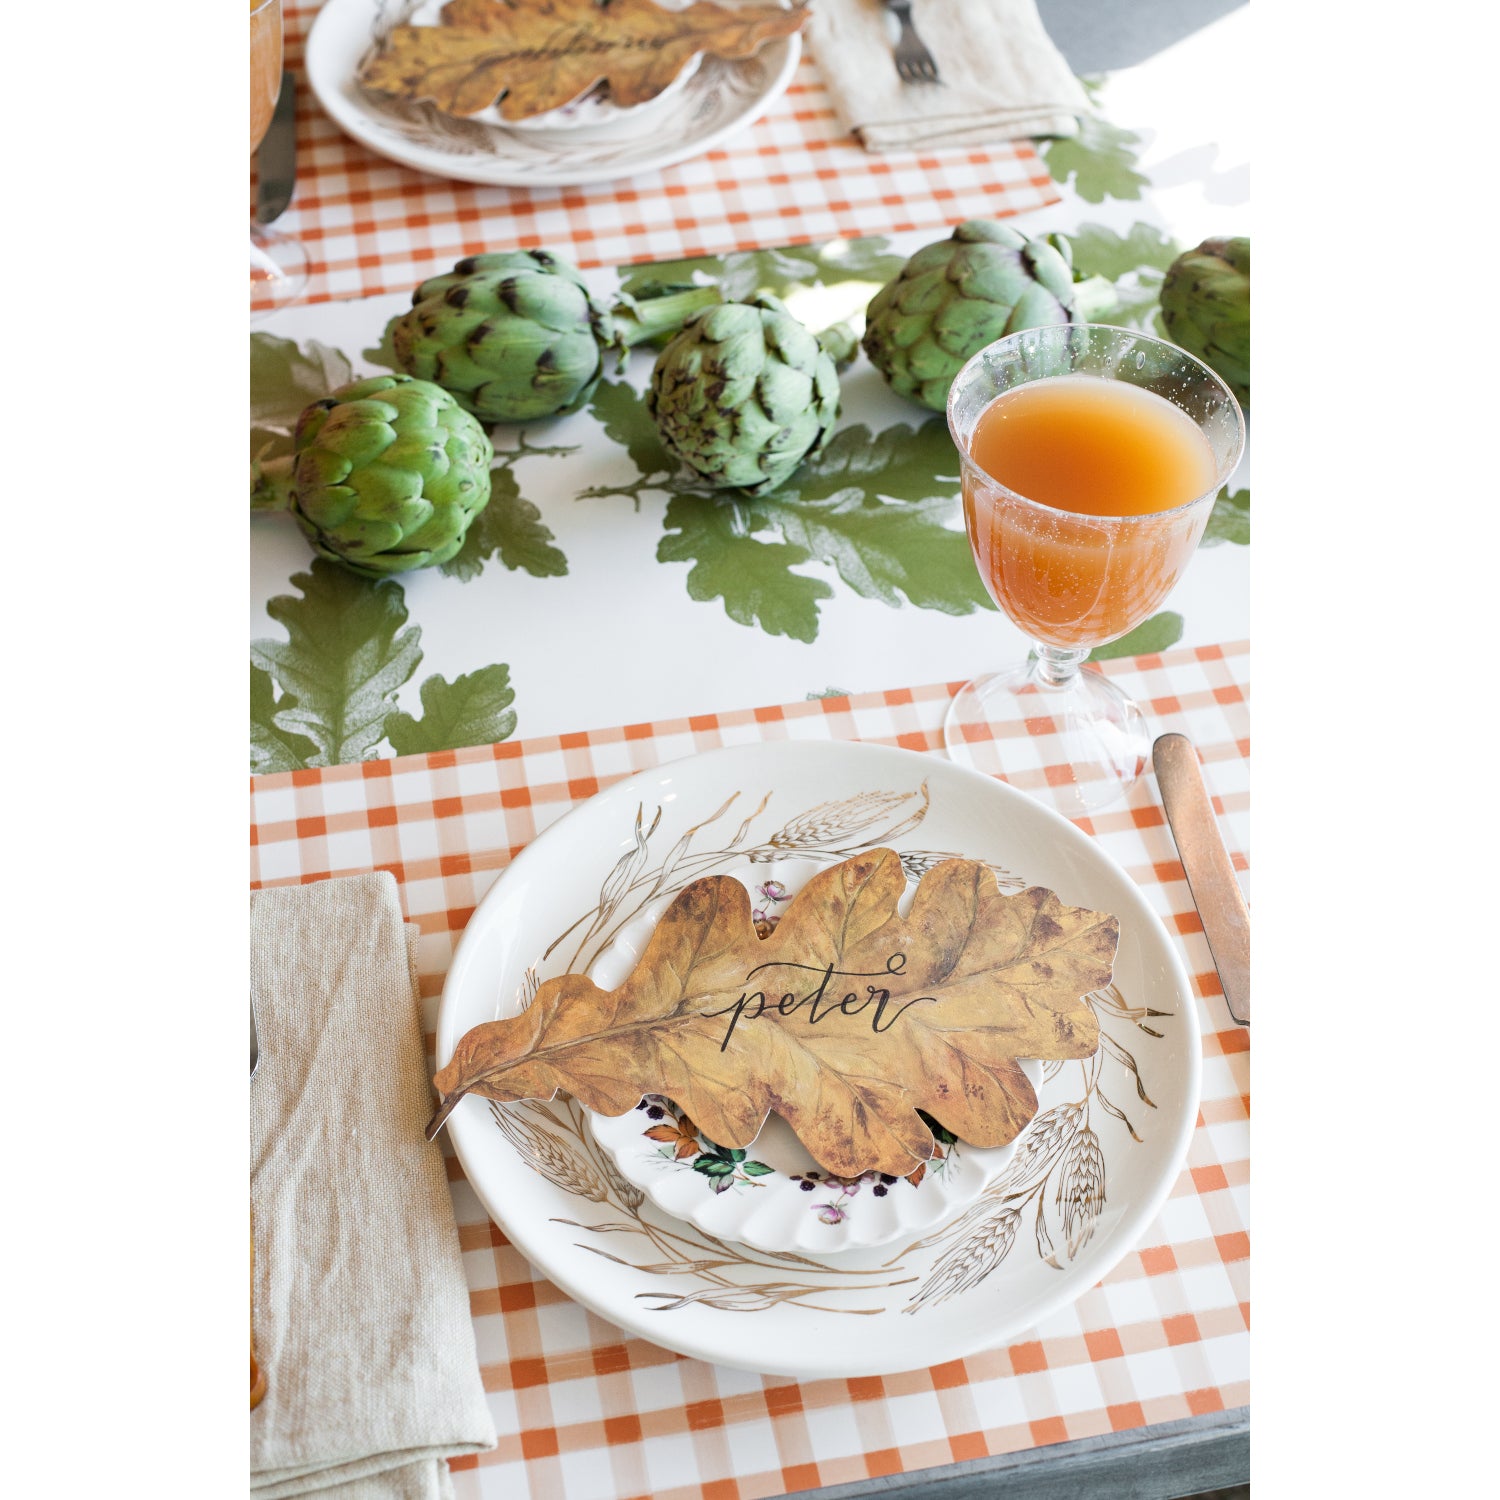 The Orange Painted Check Placemat under an elegant fall-themed table setting.